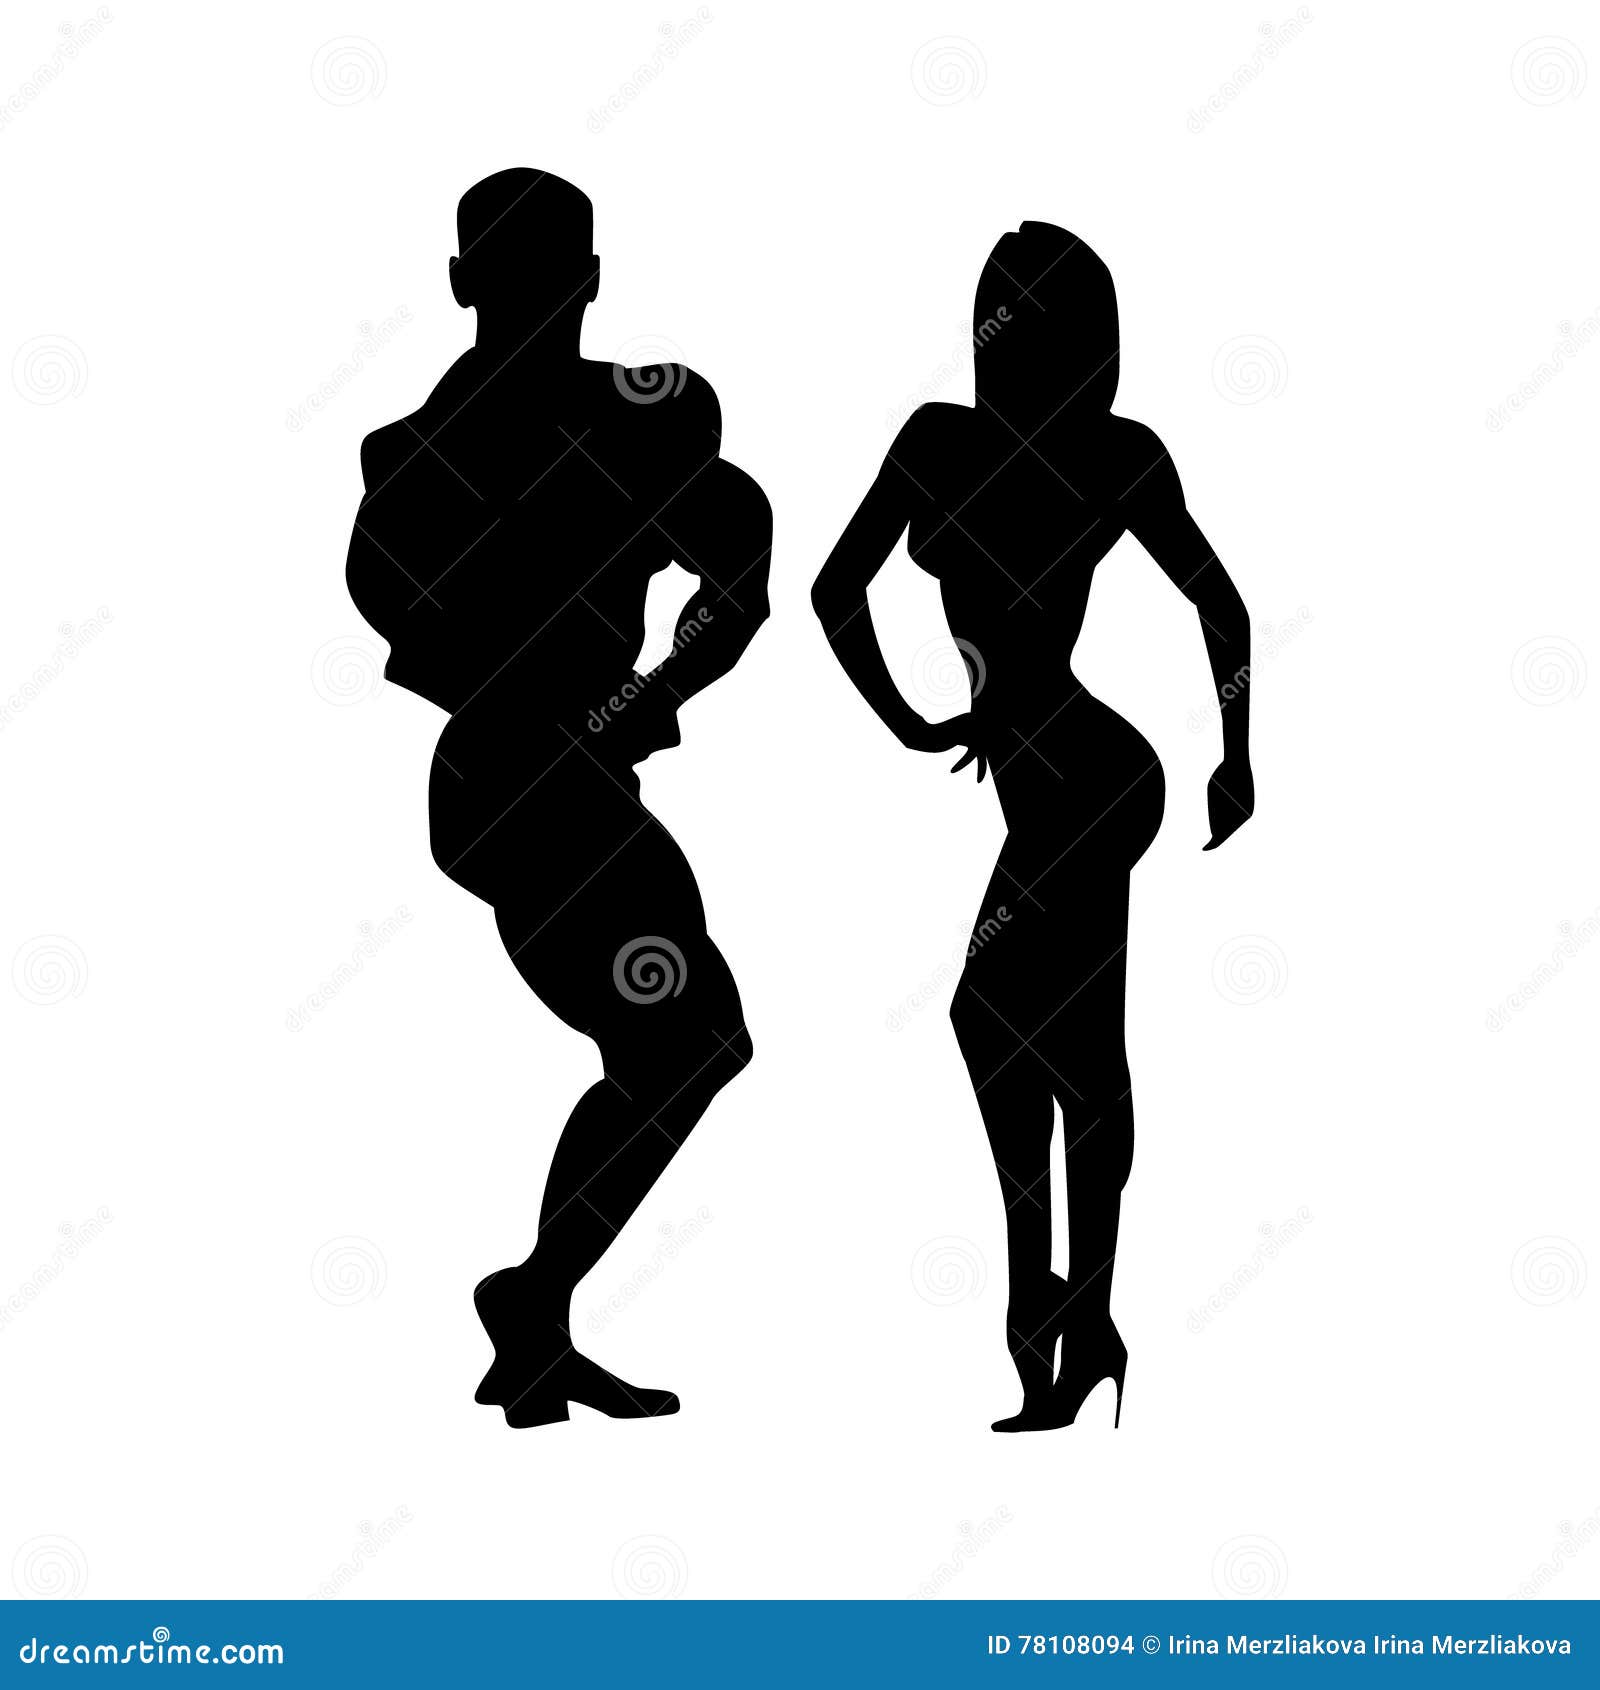 women and men silhouettes of athletes. two athletes together.